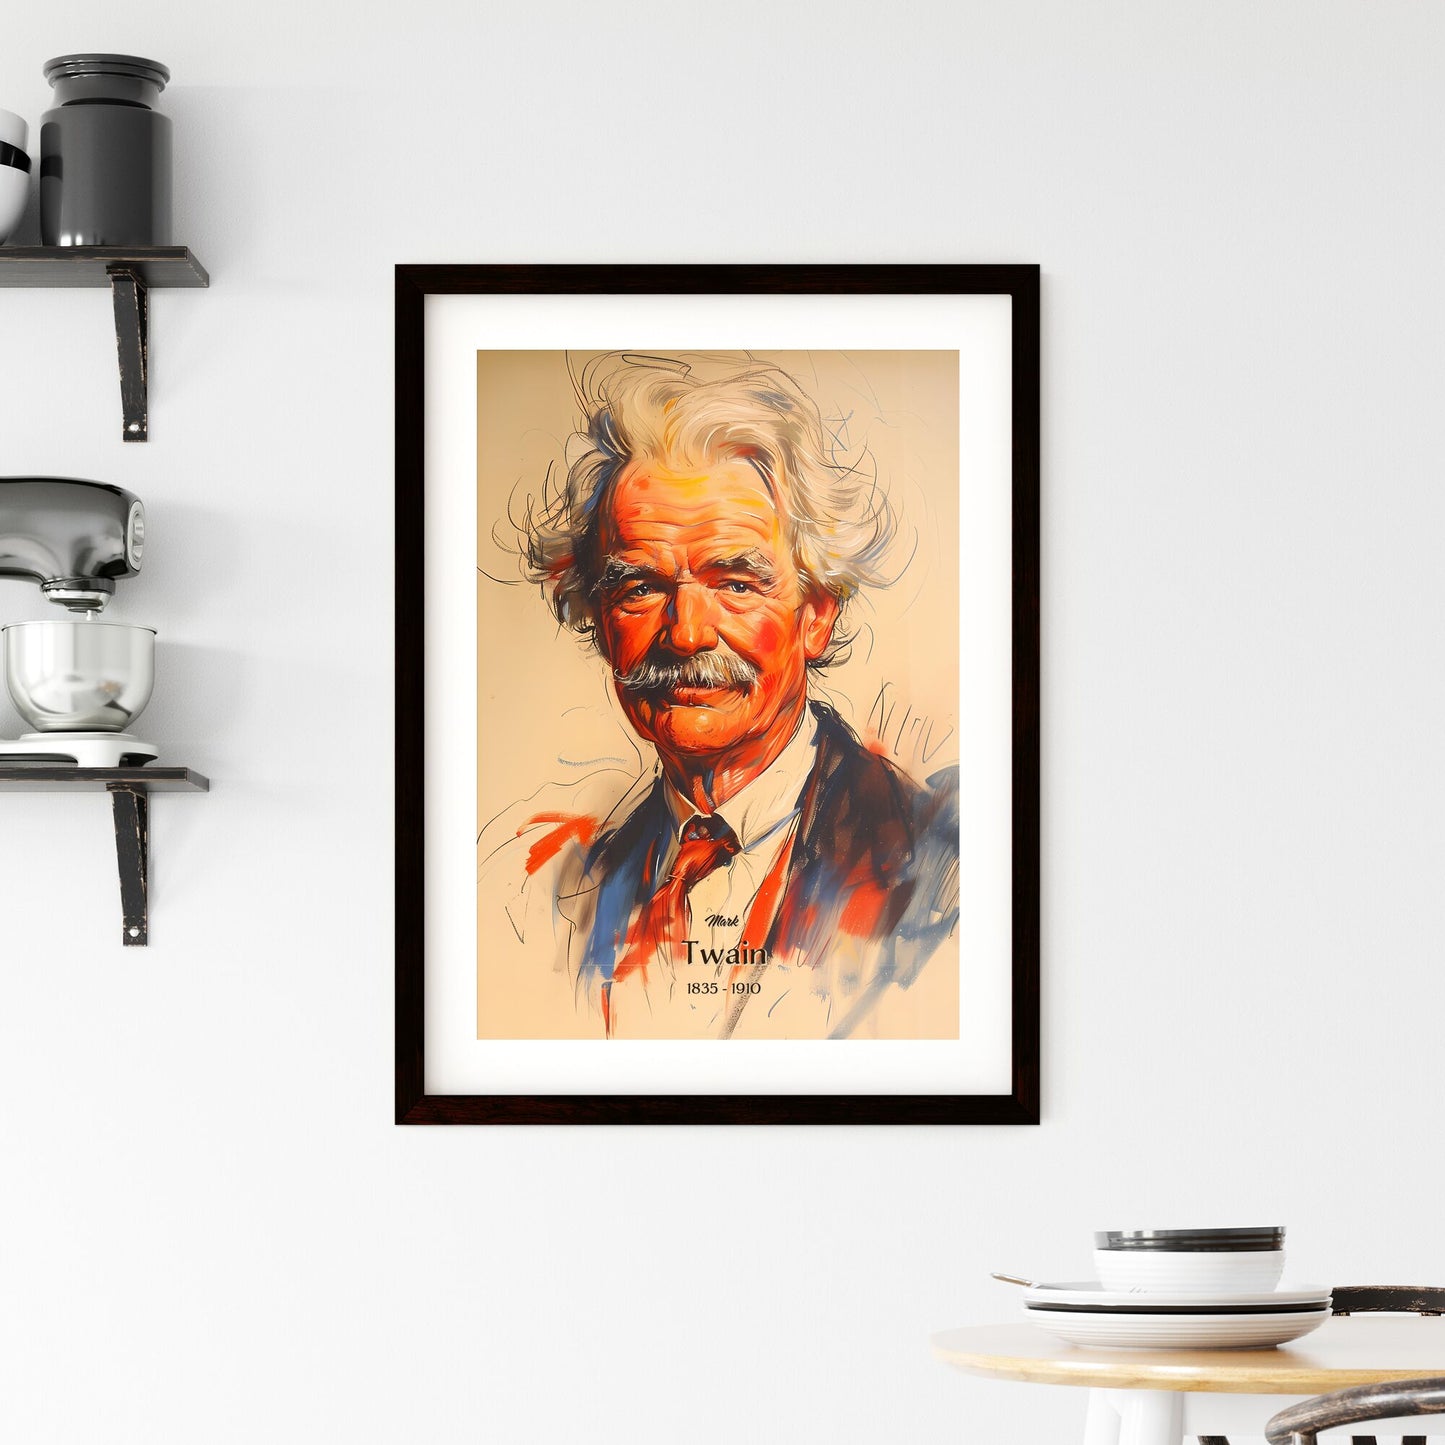 Mark, Twain, 1835 - 1910, A Poster of a painting of a man with a mustache Default Title